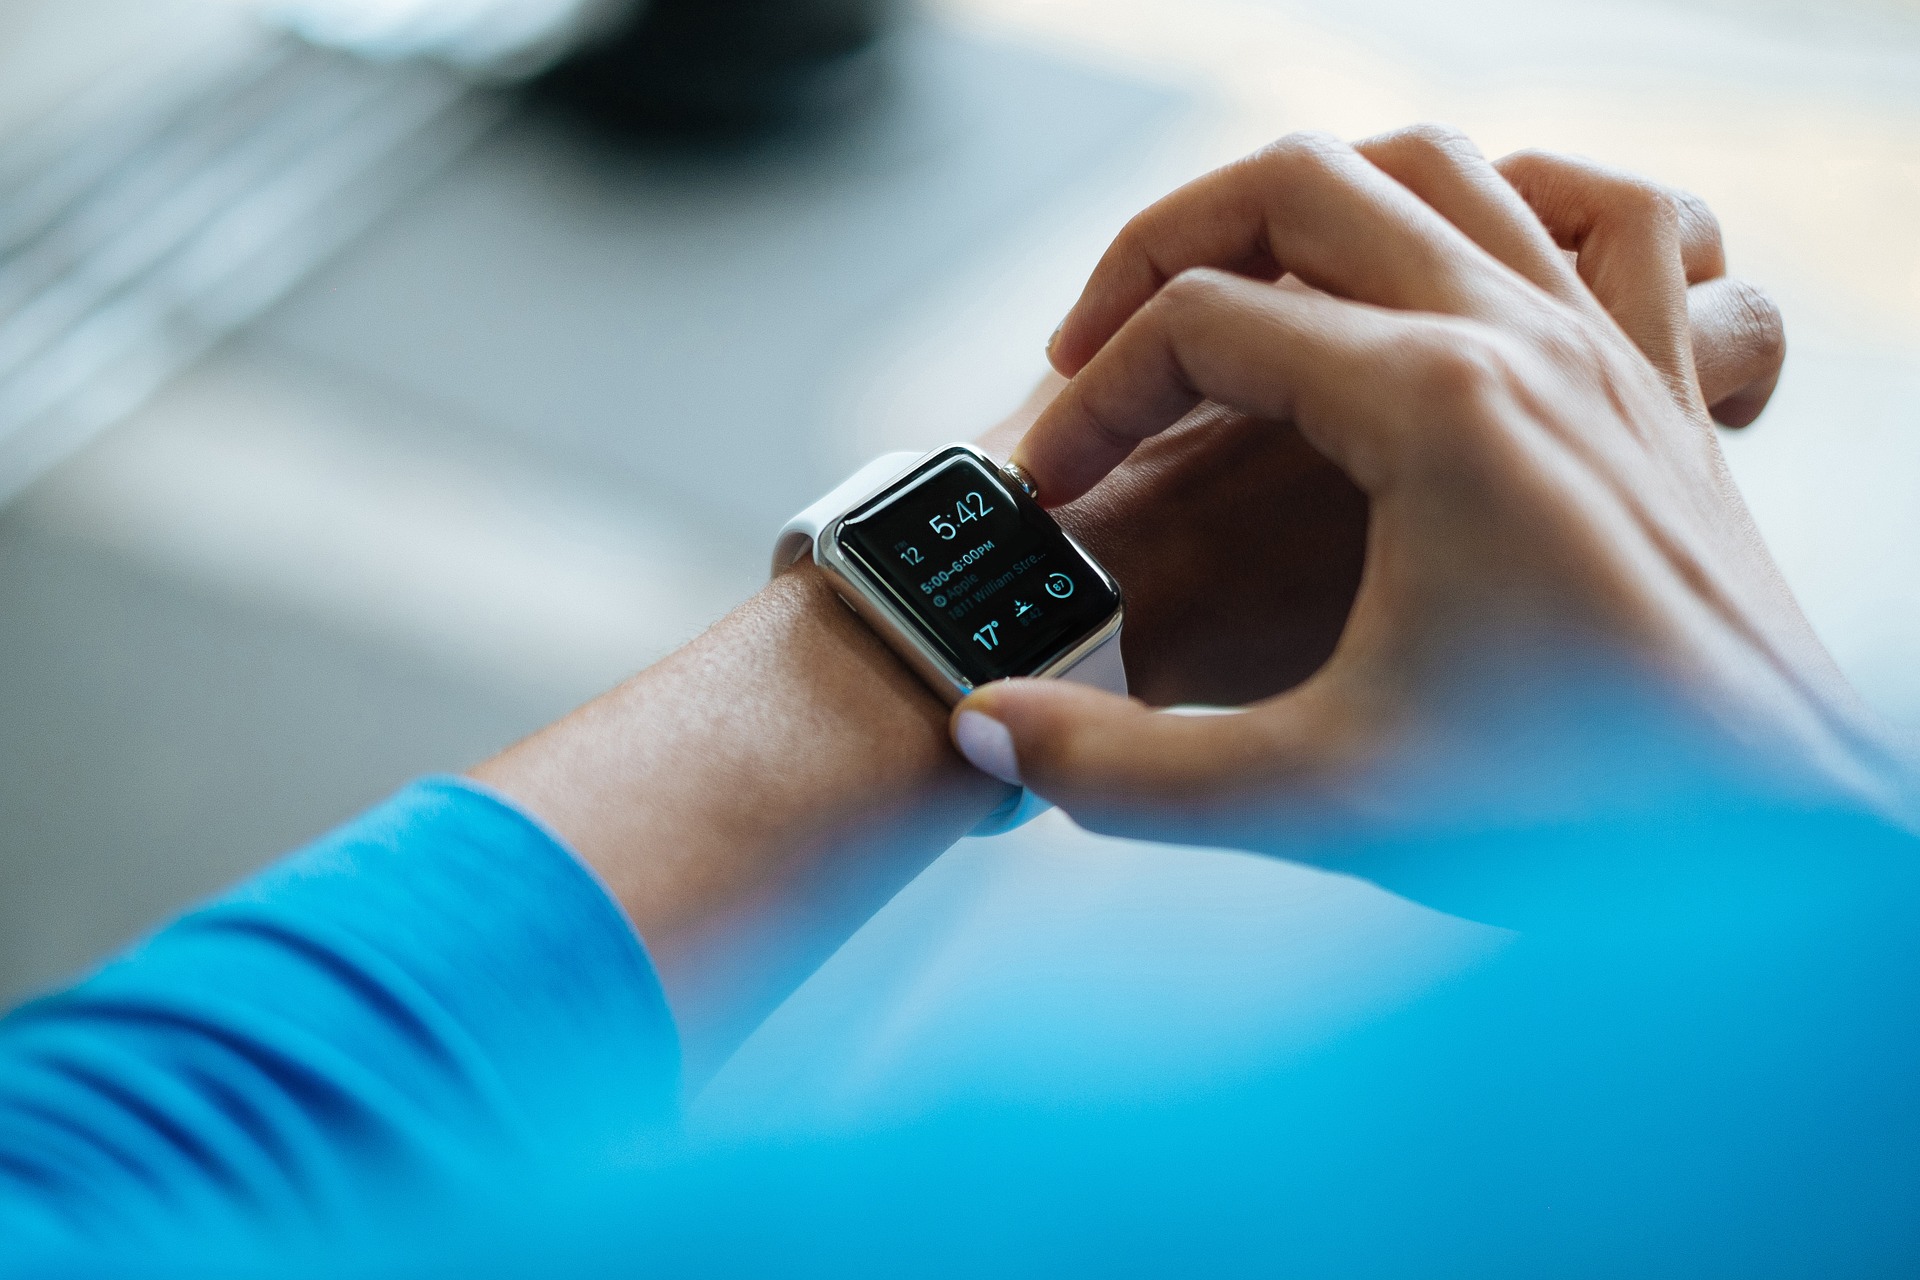 IoT and wearables in the workplace